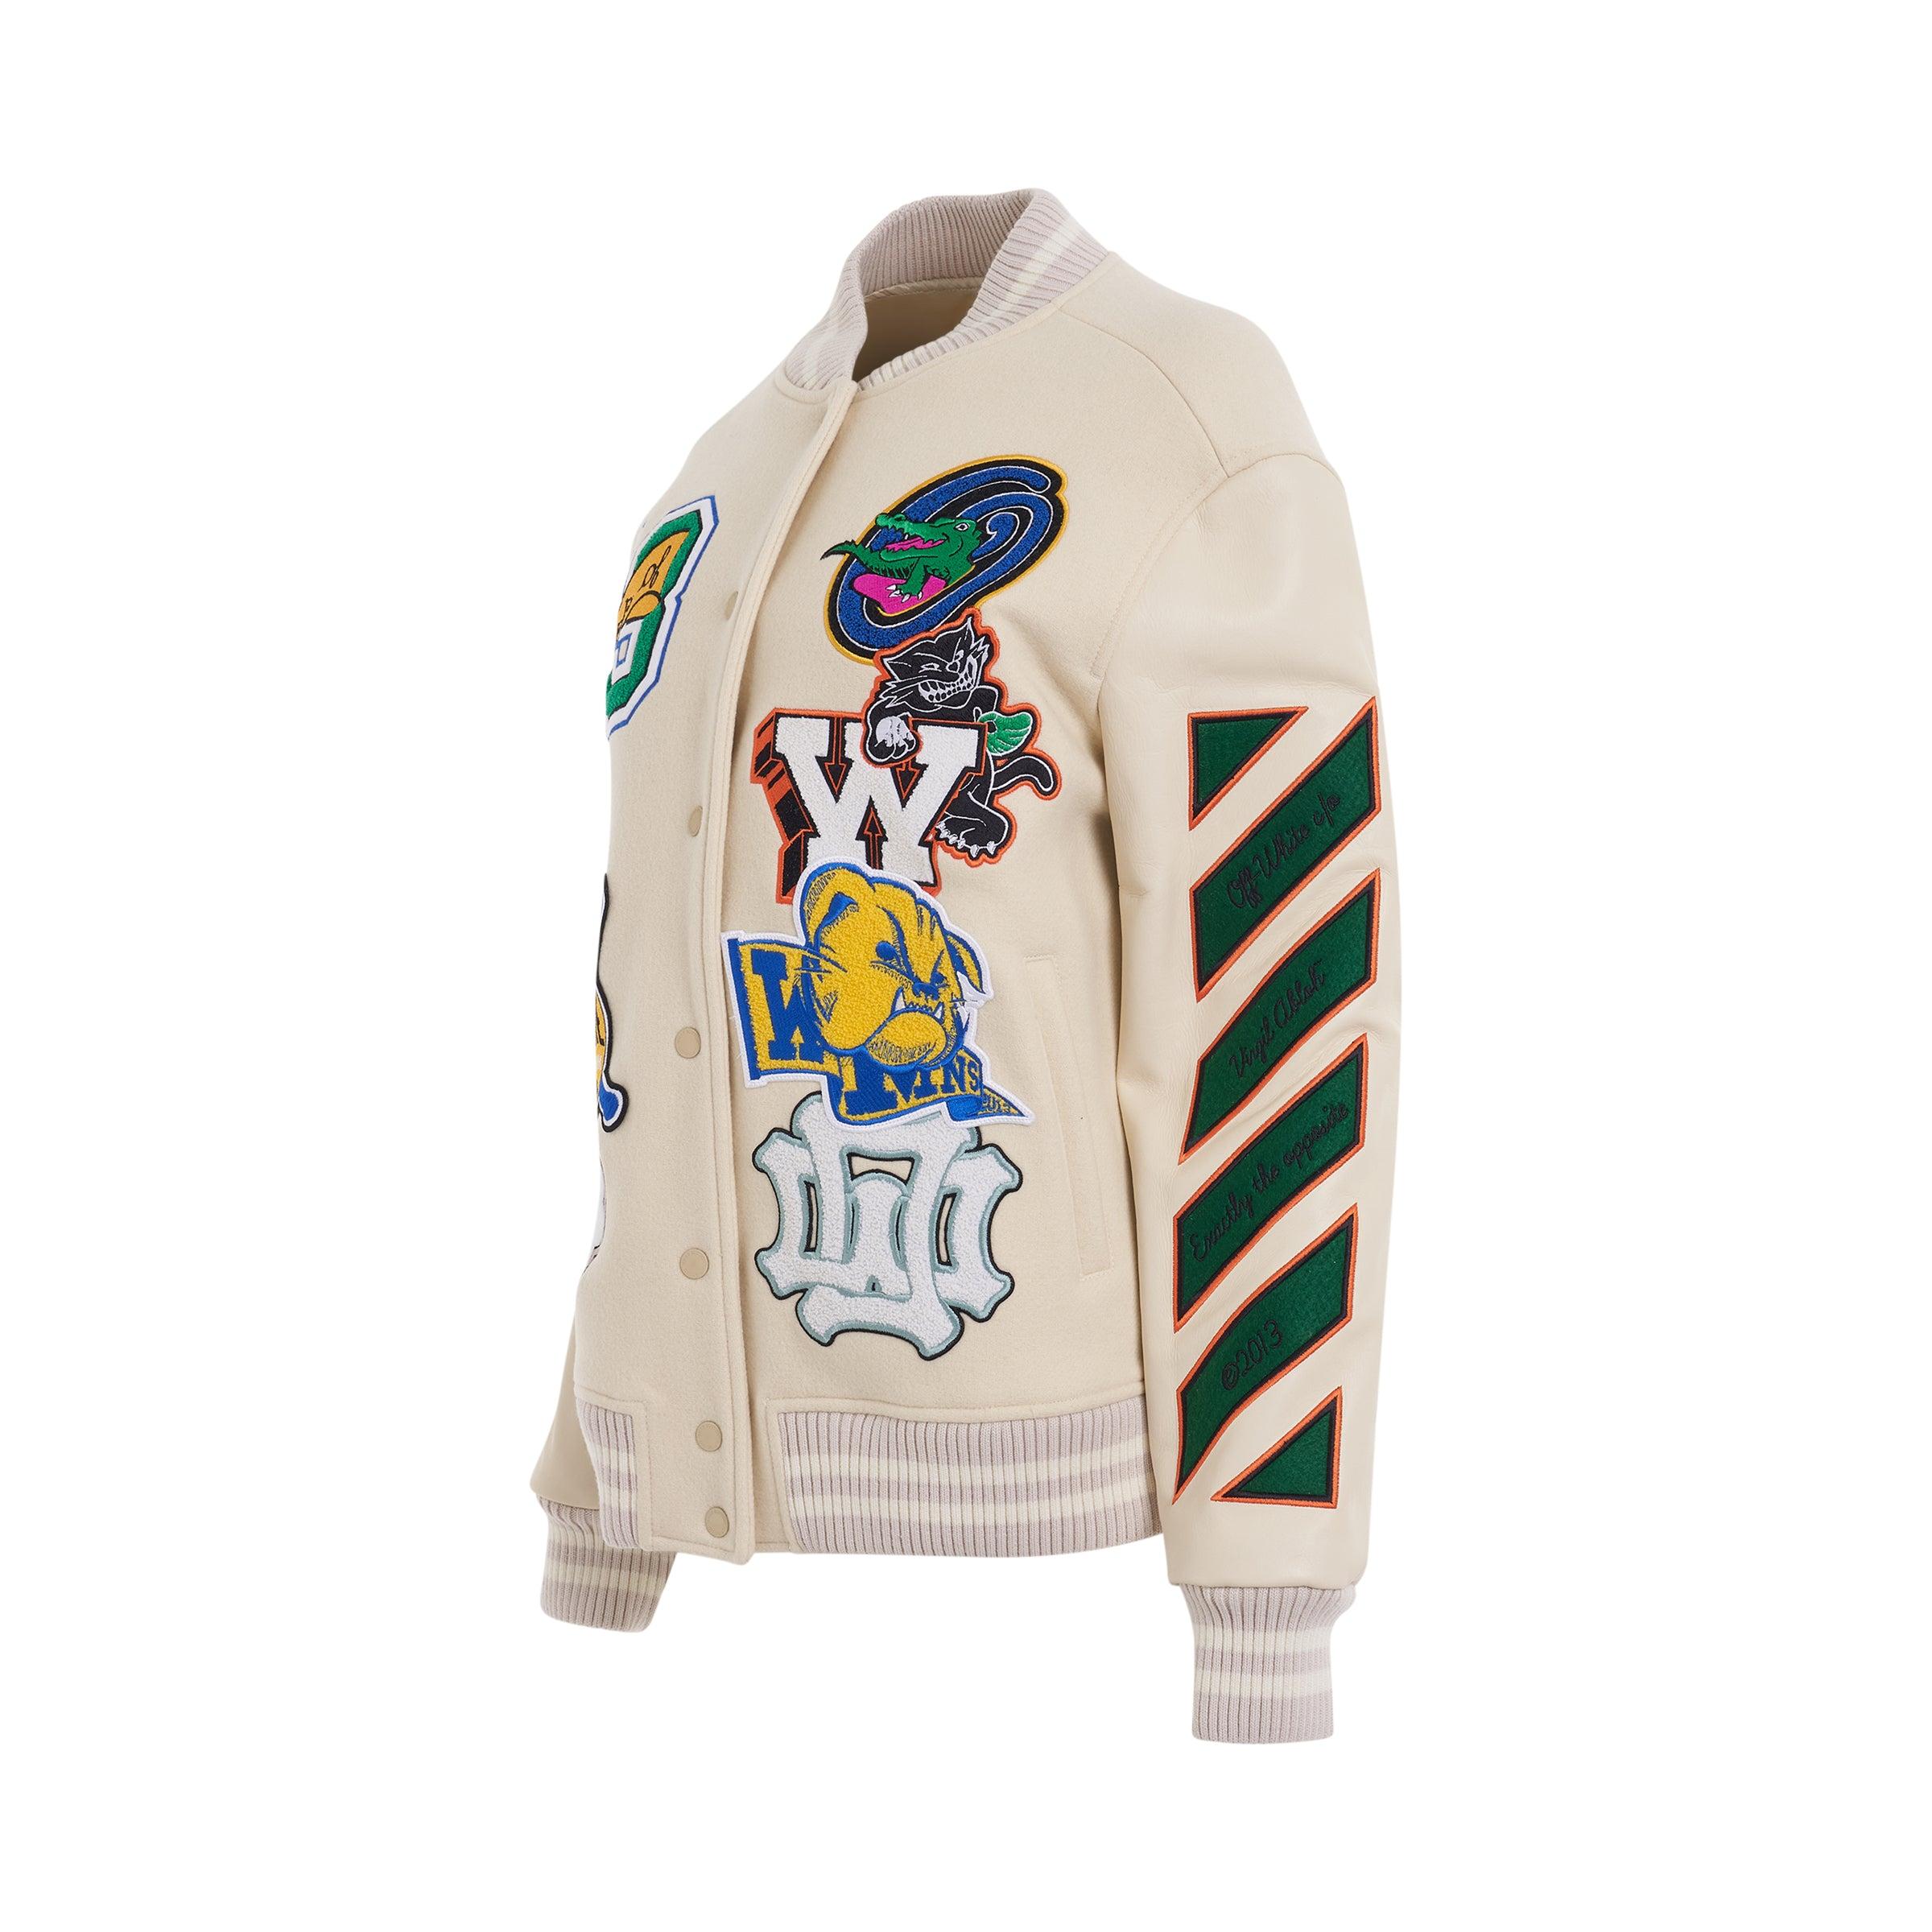 Off-White Virgil Abloh 2015 Letterman Jacket with Patches